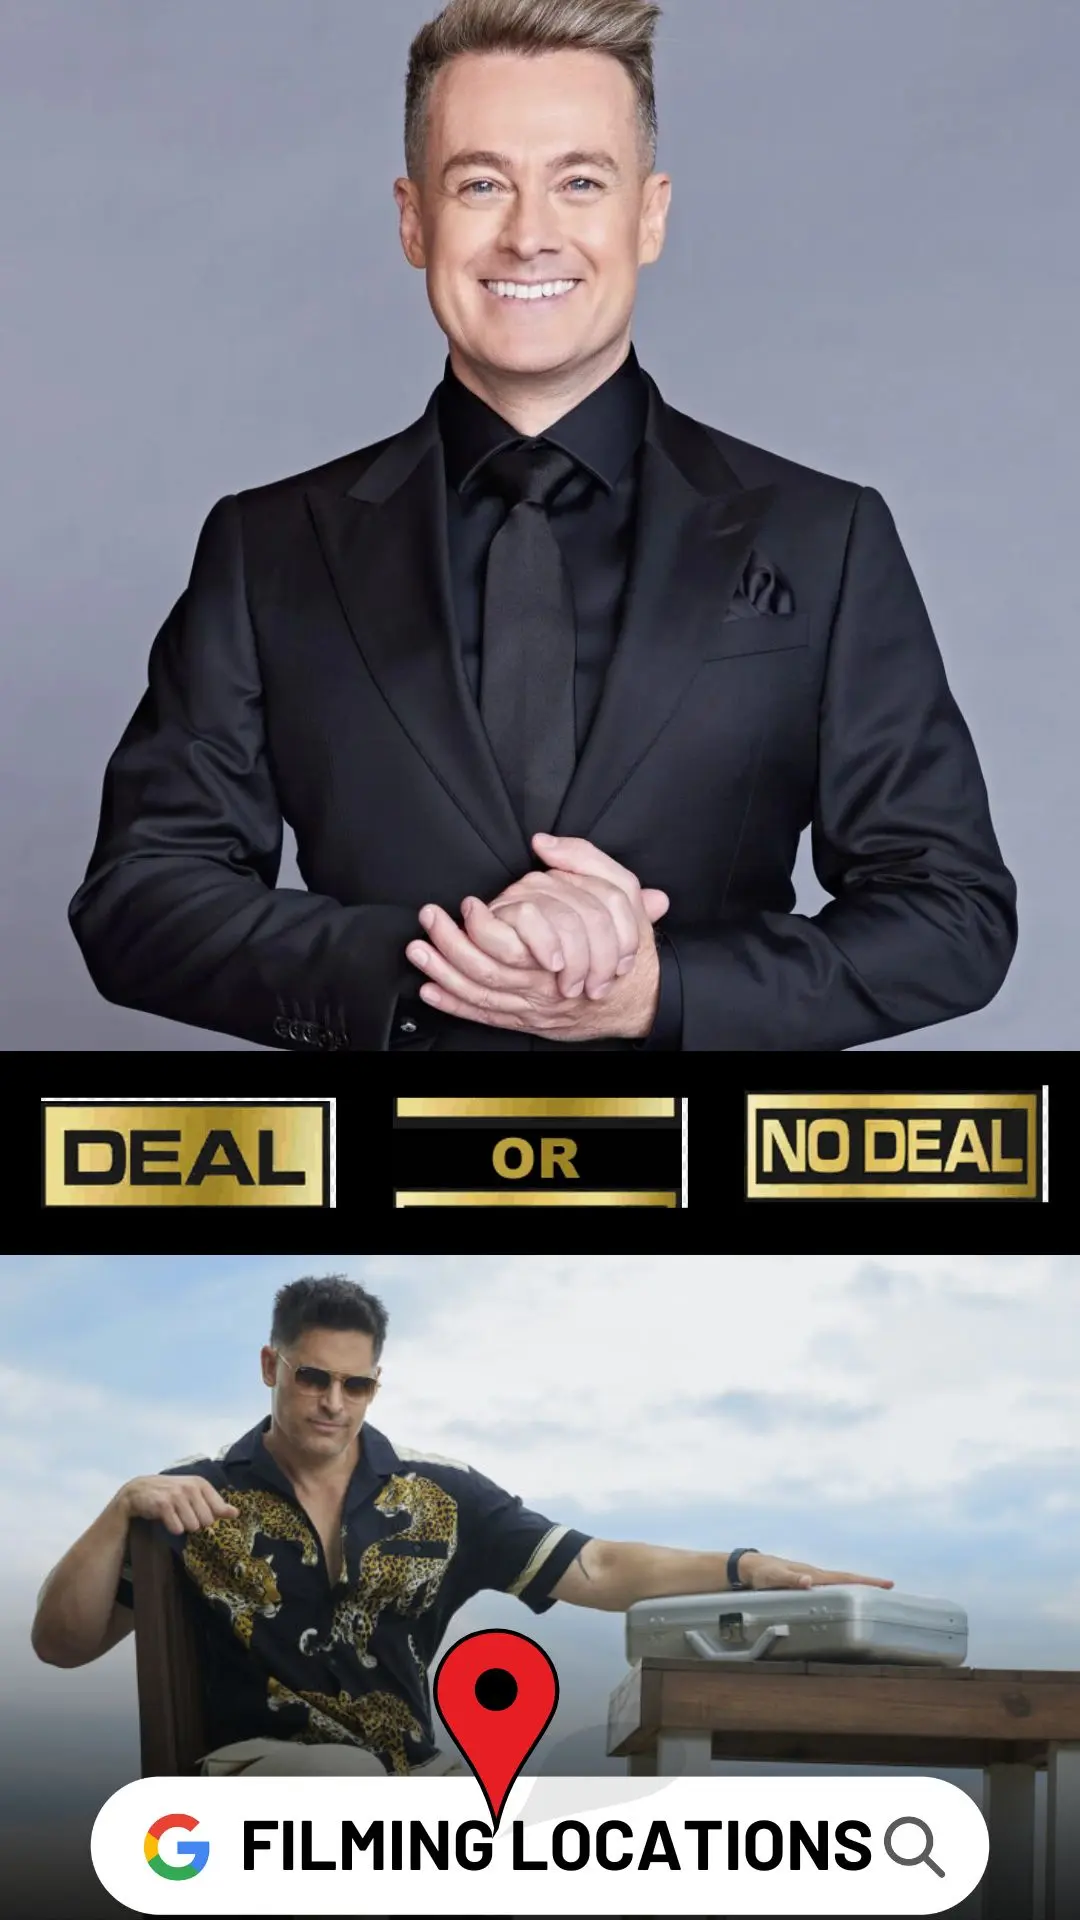 Deal or No Deal Island Filming Locations